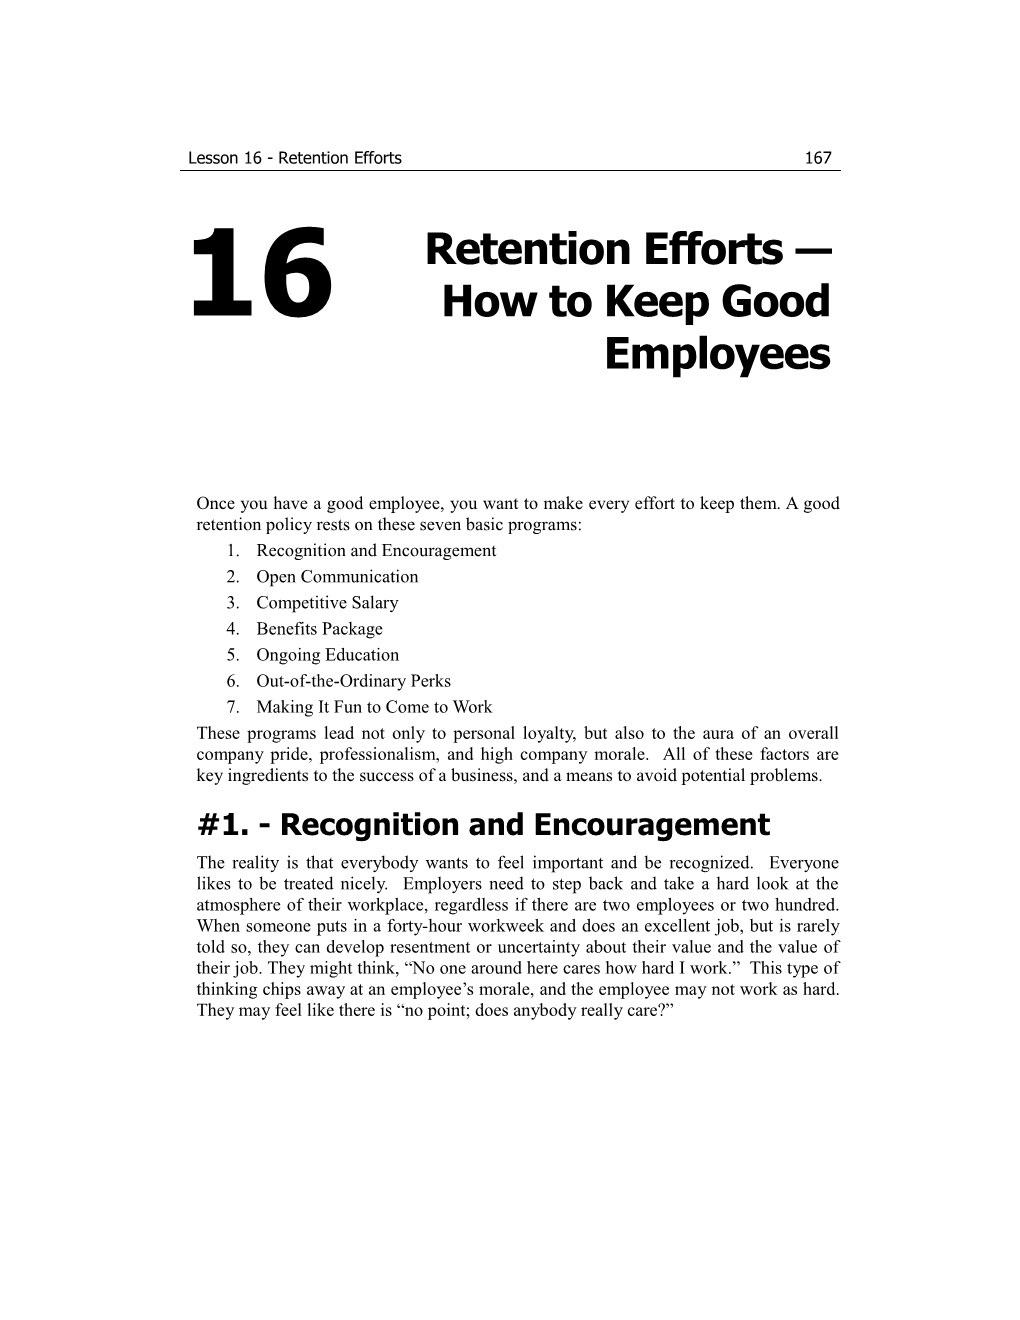 Once You Have a Good Employee, You Want to Make Every Effort to Keep Them. a Good Retention